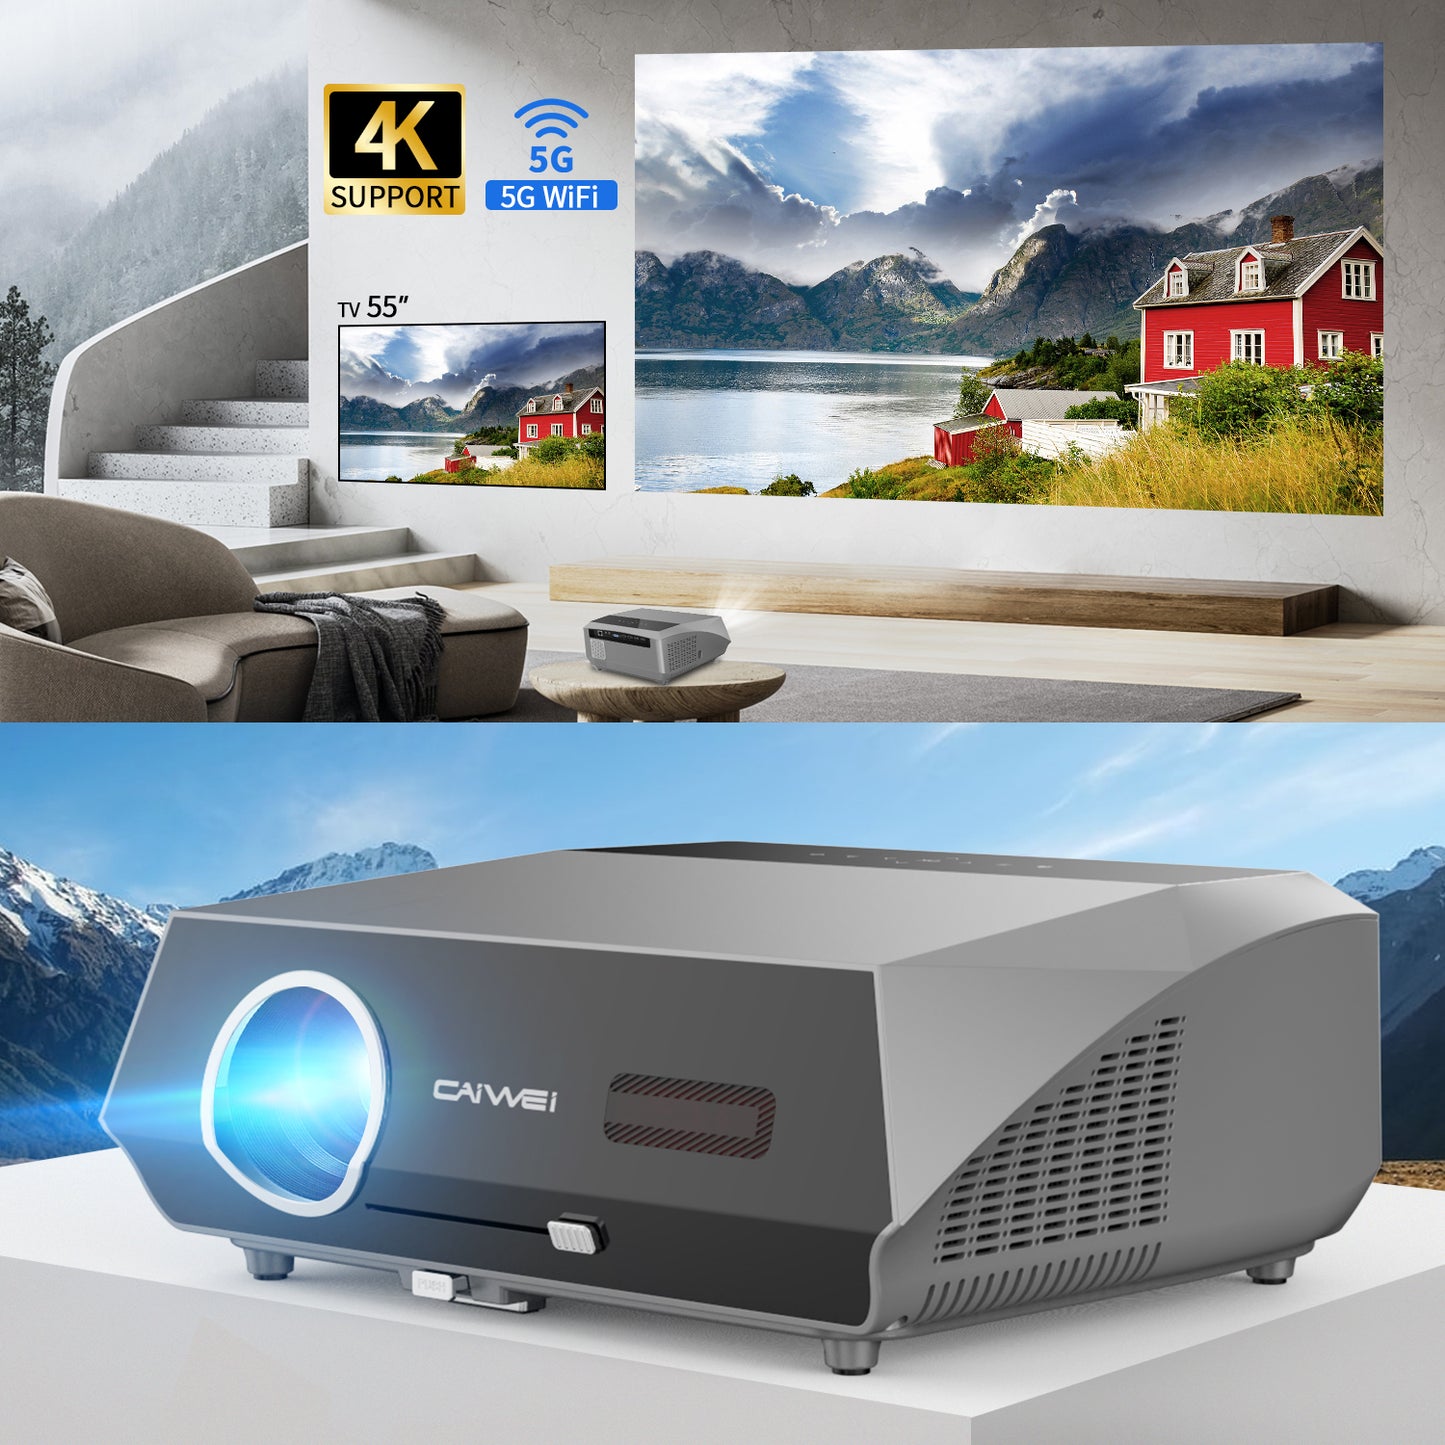 4K Outdoor Projector Auto Focus/Keystone-Built-in Android TV, 1200 ANSI Ultra Bright HDR10+ Daylight Projectors with WiFi 6 Bluetooth